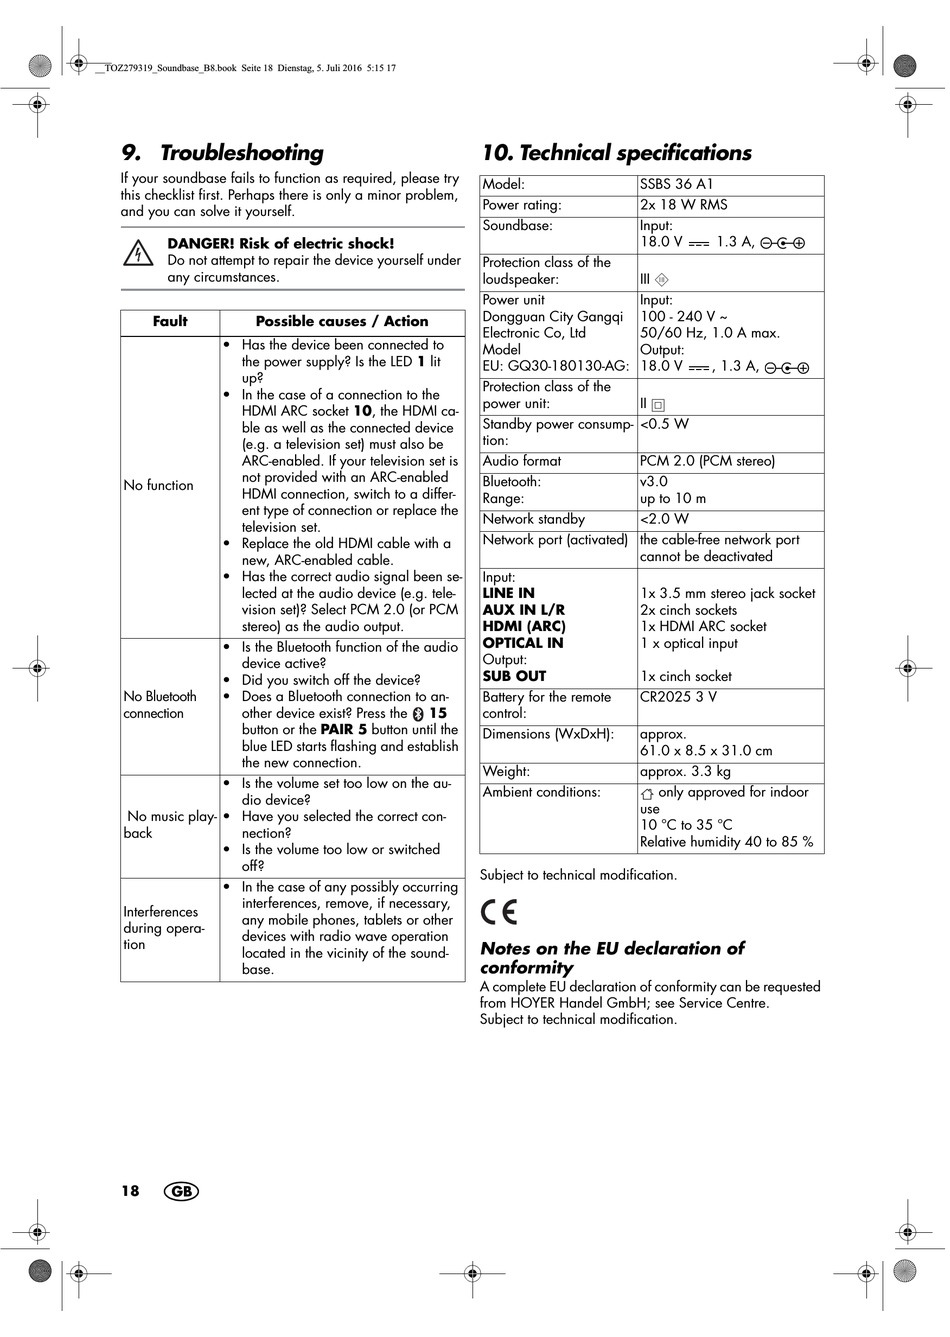 Troubleshooting; Technical Specifications - 20] 36 Instructions [Page ManualsLib Manual | SSBS A1 Operating Silvercrest